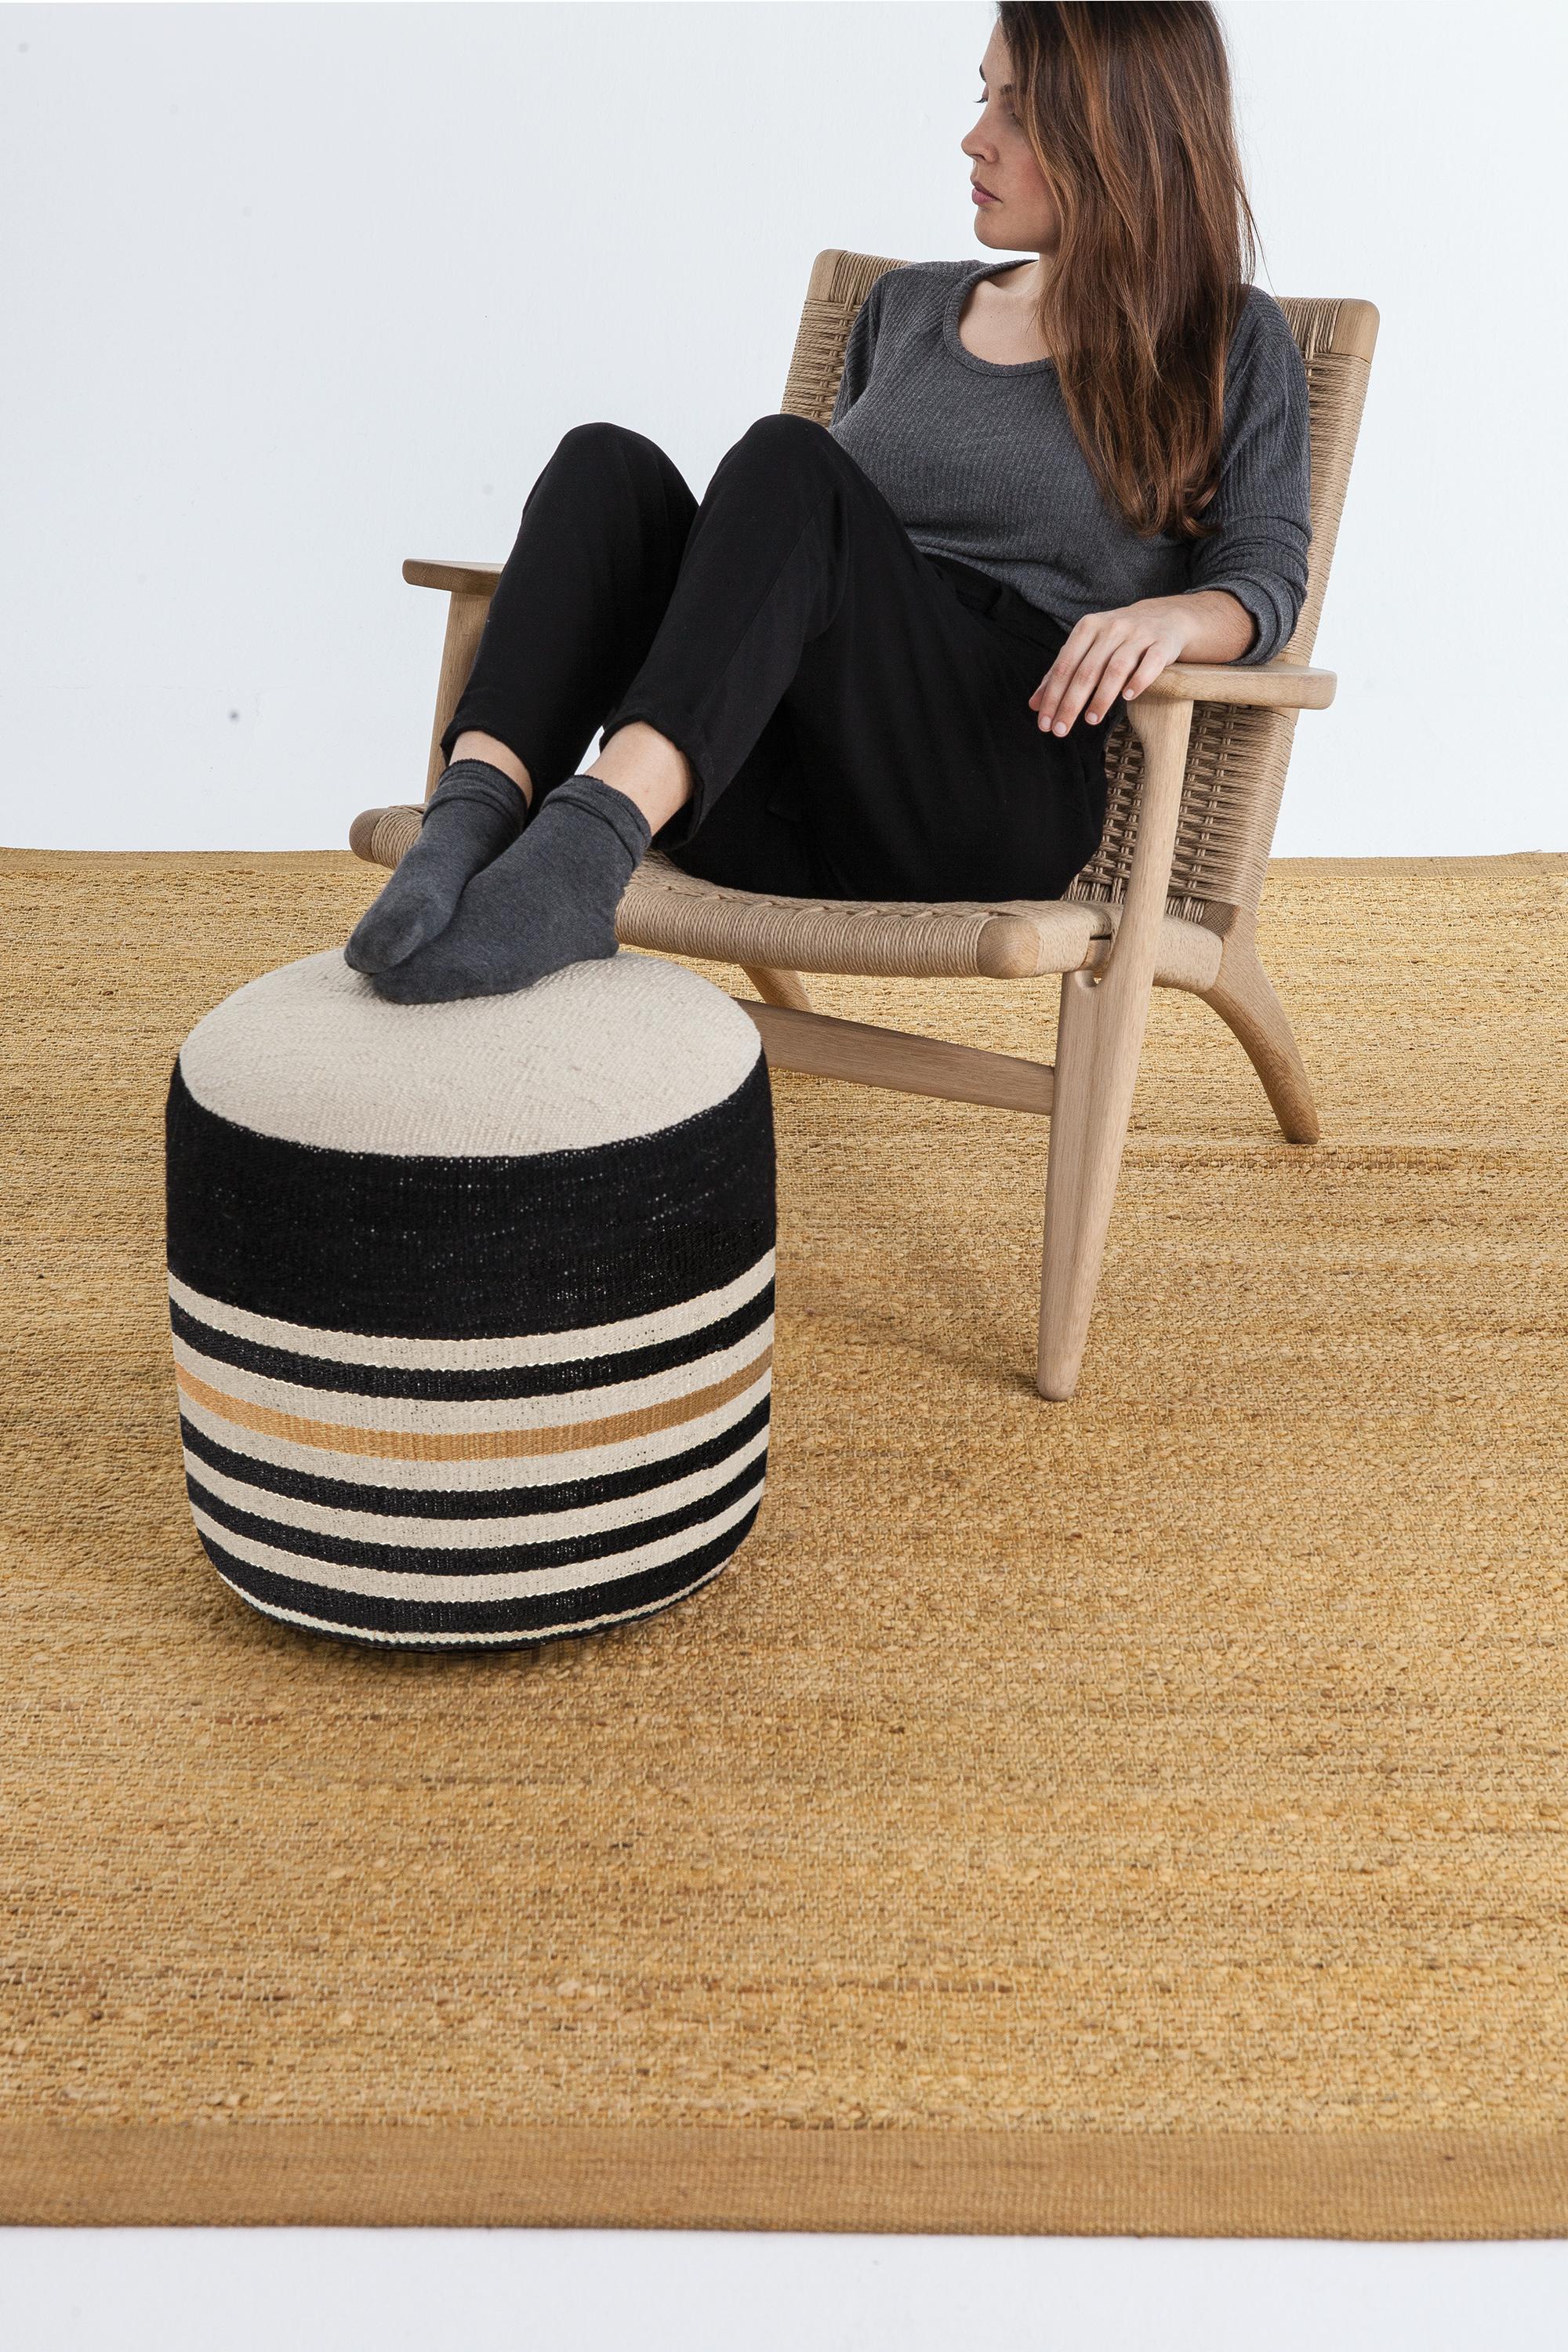 'Kilim 2' Pouf by Nani Marquina and Marcos Catalán for Nanimarquina.

Executed in 100% hand-spun Afghan wool with a birch base and flame-retardant filling, this decorative accessory is the perfect way to add a touch of color to any room in the